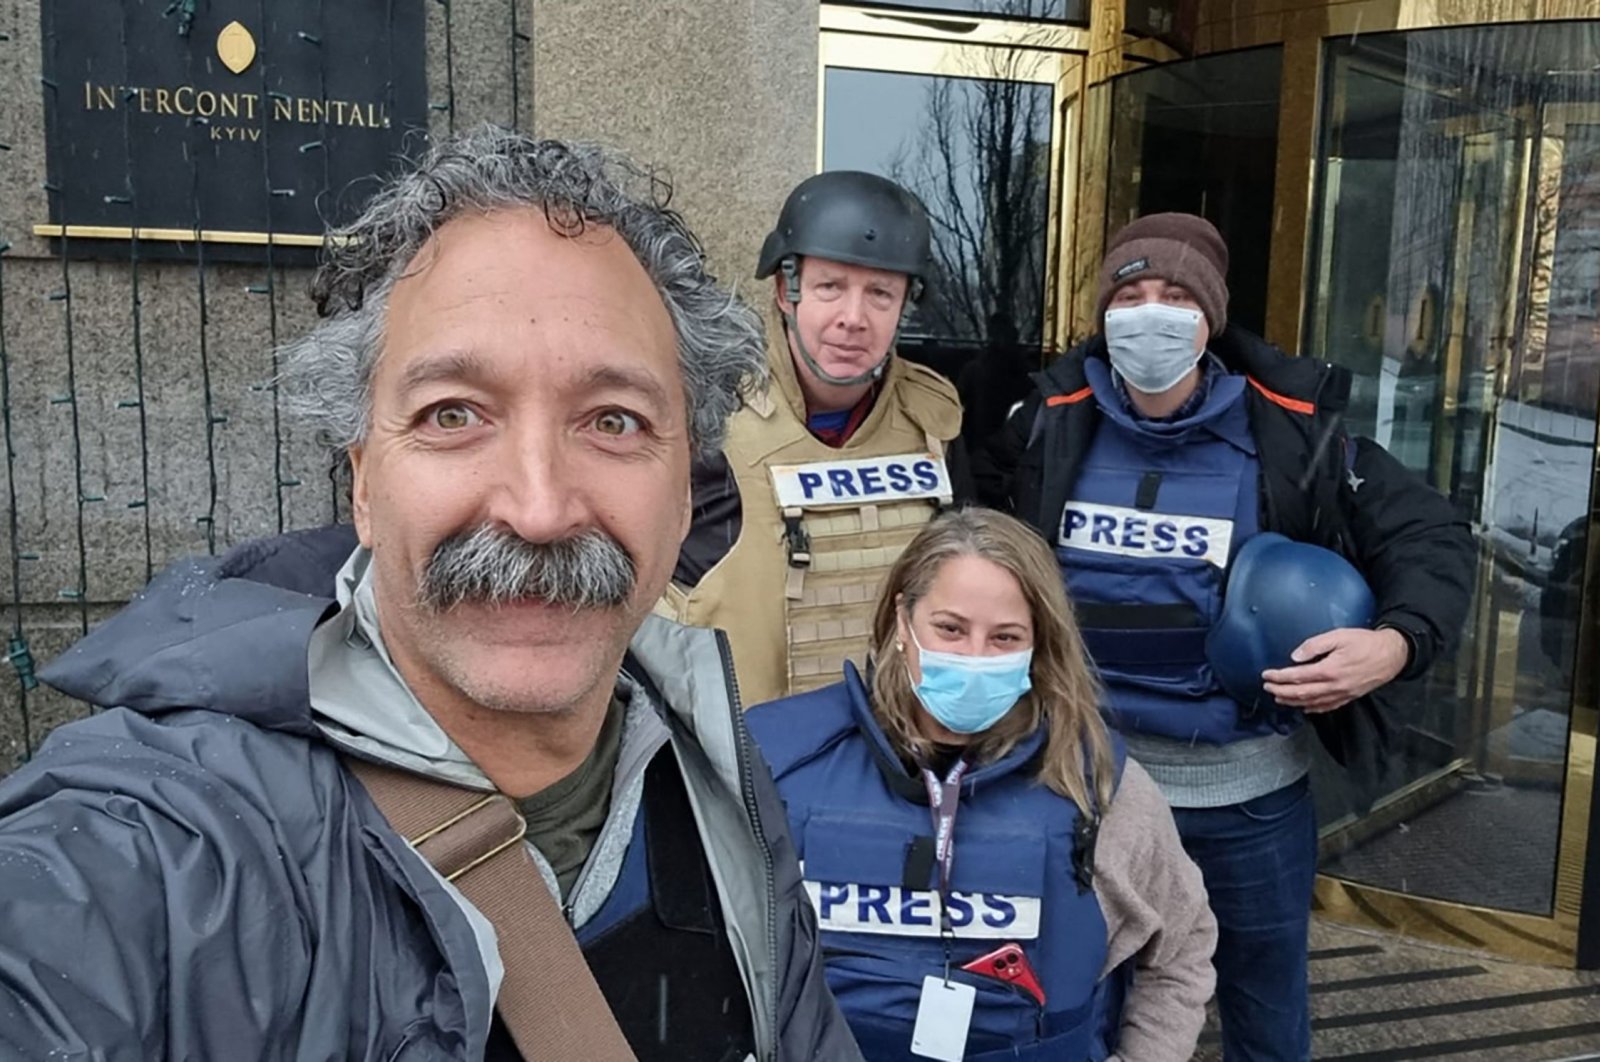 This undated image courtesy of Fox News shows cameraman Pierre Zakrzewski (L) posing with colleagues at the Kyiv Intercontinental Hotel. (AFP Photo)